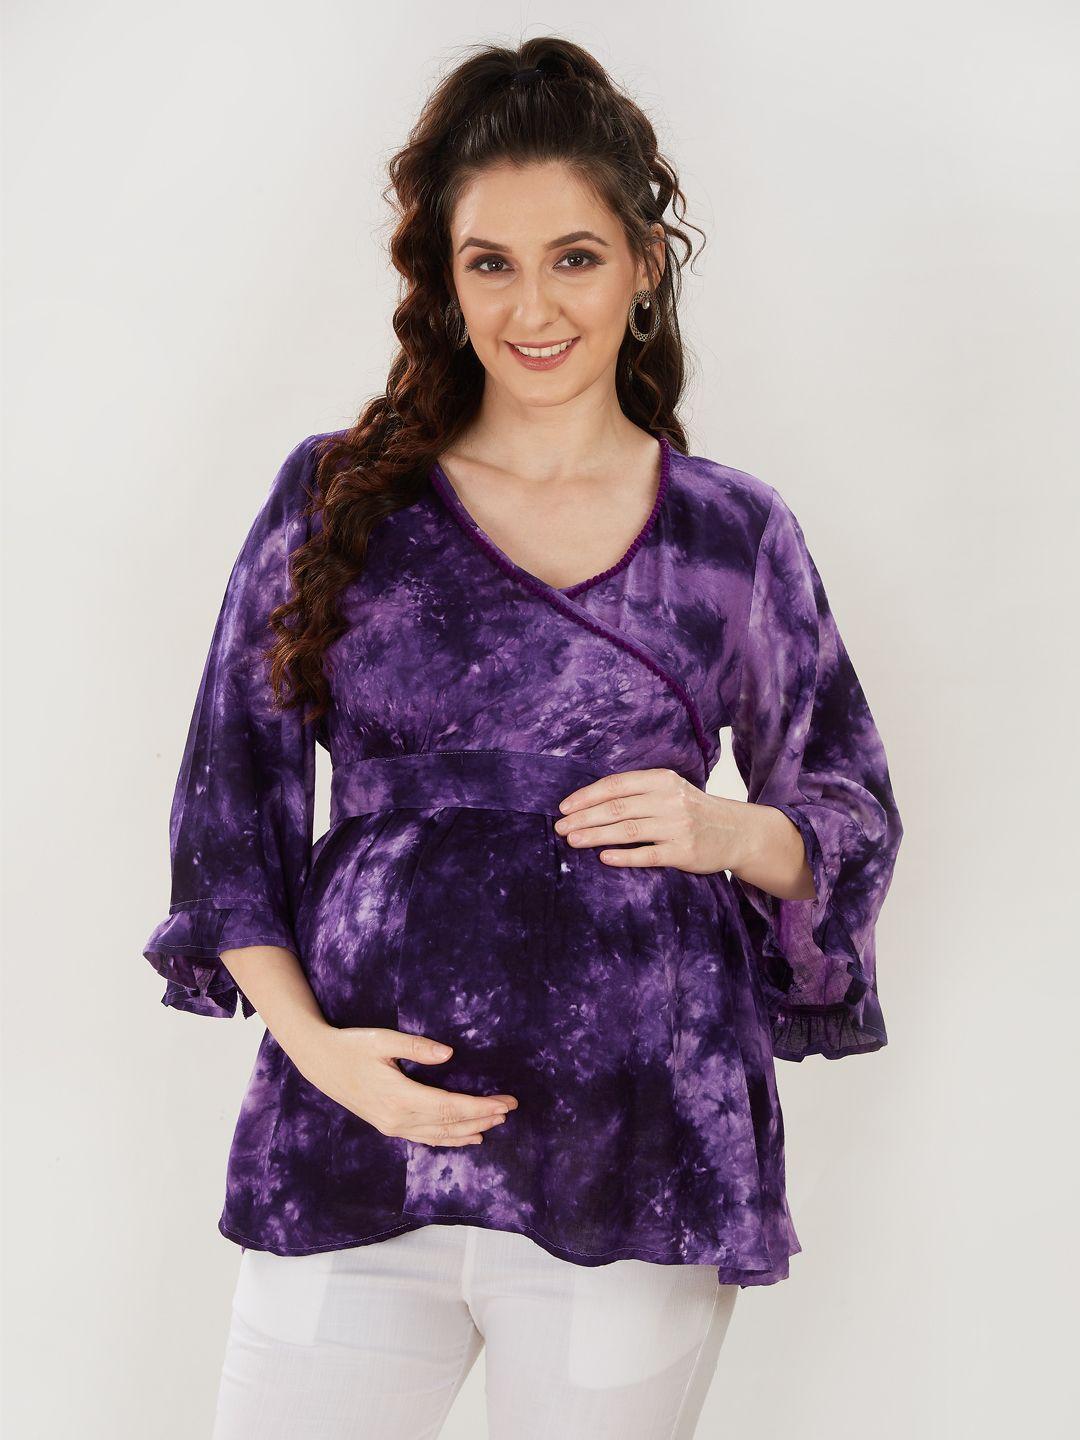 mom-for-sure-by-ketki-dalal-women-purple-tie-and-dye-print-maternity-top